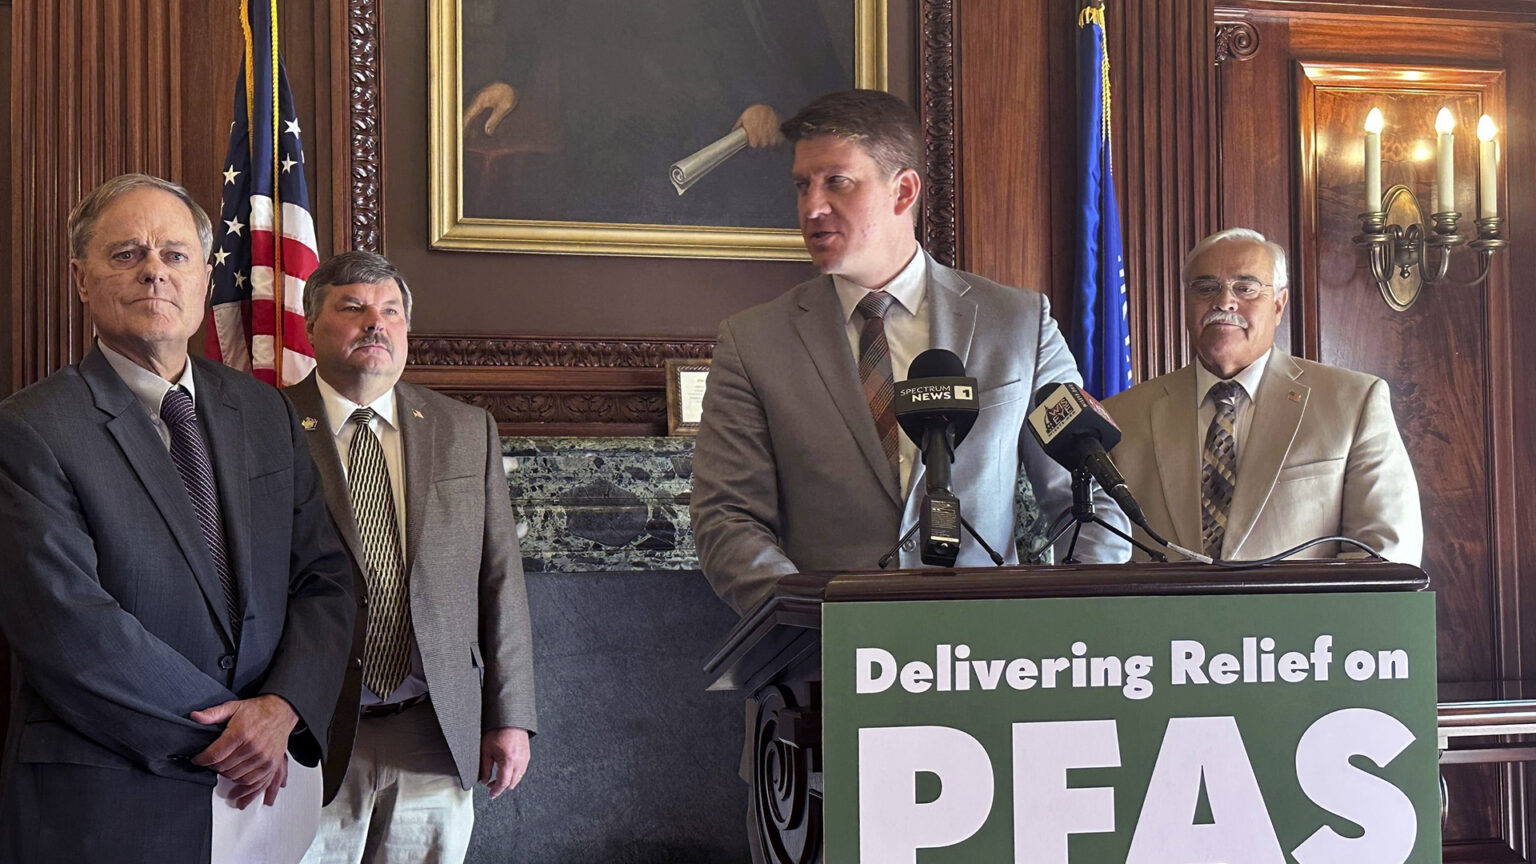 Eric Wimberger looks to the right while standing behind a podium affixed with two microphones and a sign on its front reading Delivering Relief on PFAS, with Rob Cowles and Rob Swearingen on one side and Jeff Mursau on the other, in a room with wood-paneled walls, the U.S. and Wisconsin flags, an painting, and an illuminated electric wall sconce.